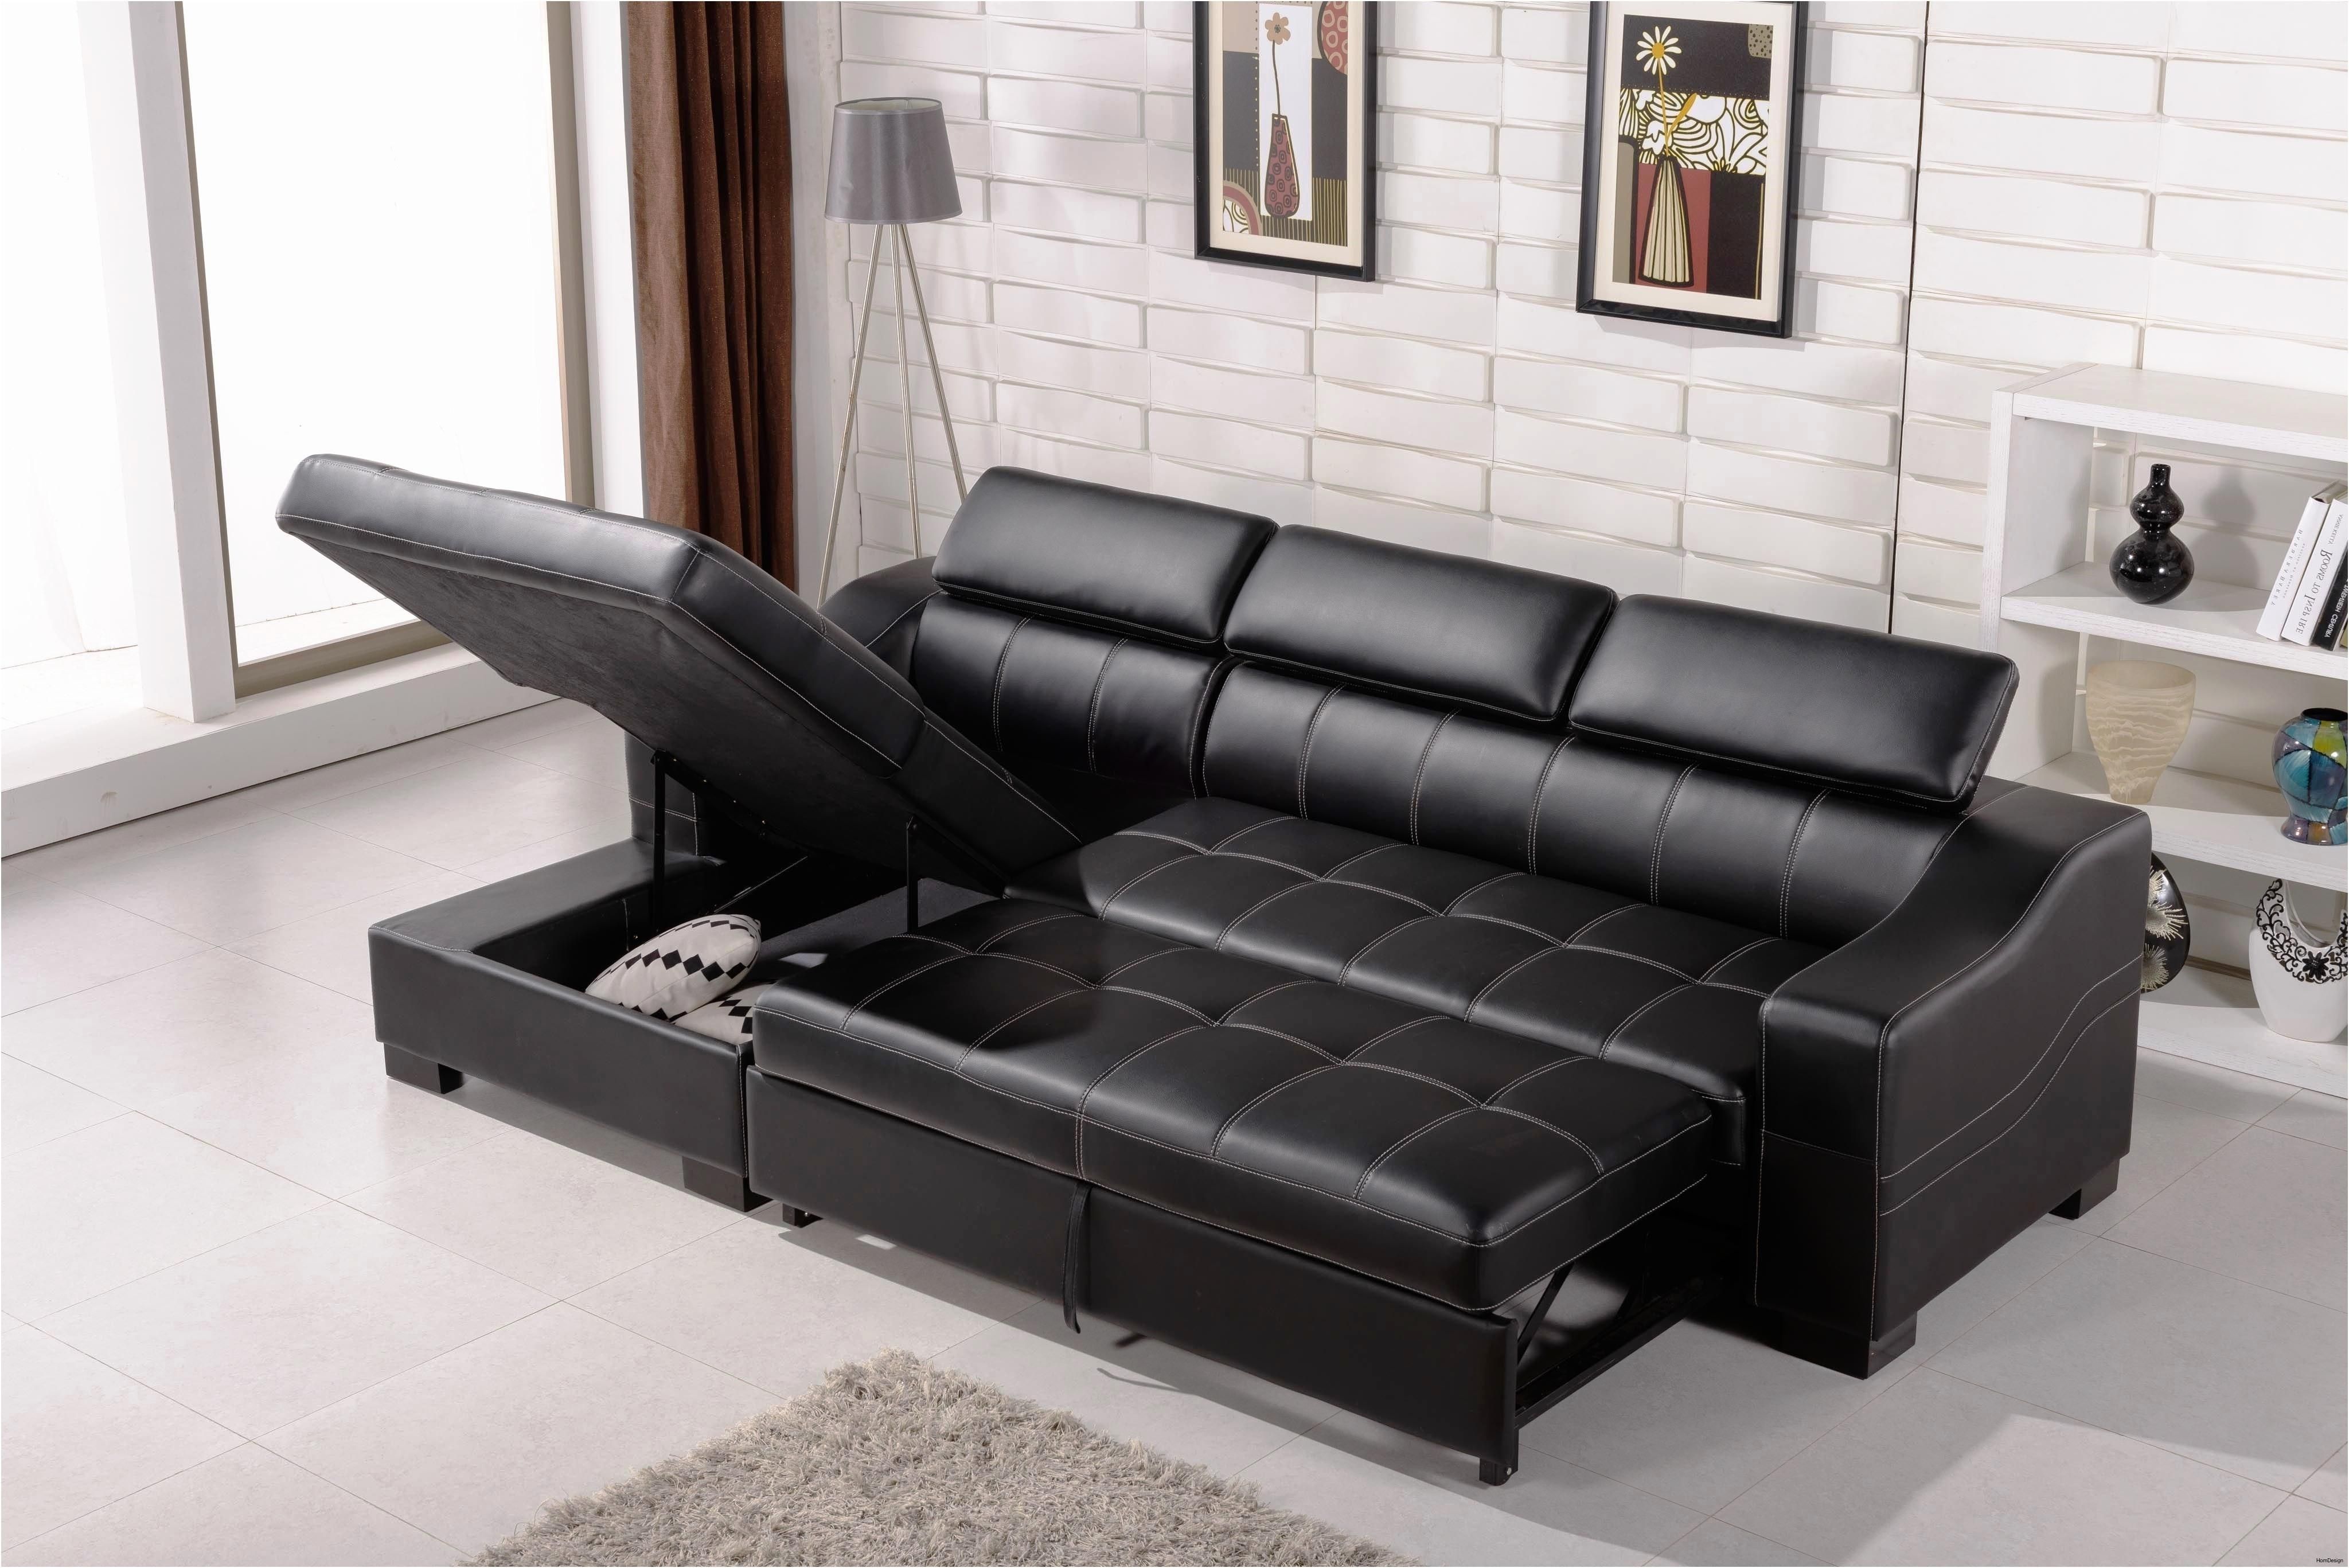 Furniture : Sectional Couch Costco Inspirational Best Sectional Within Victoria Bc Sectional Sofas (View 10 of 10)